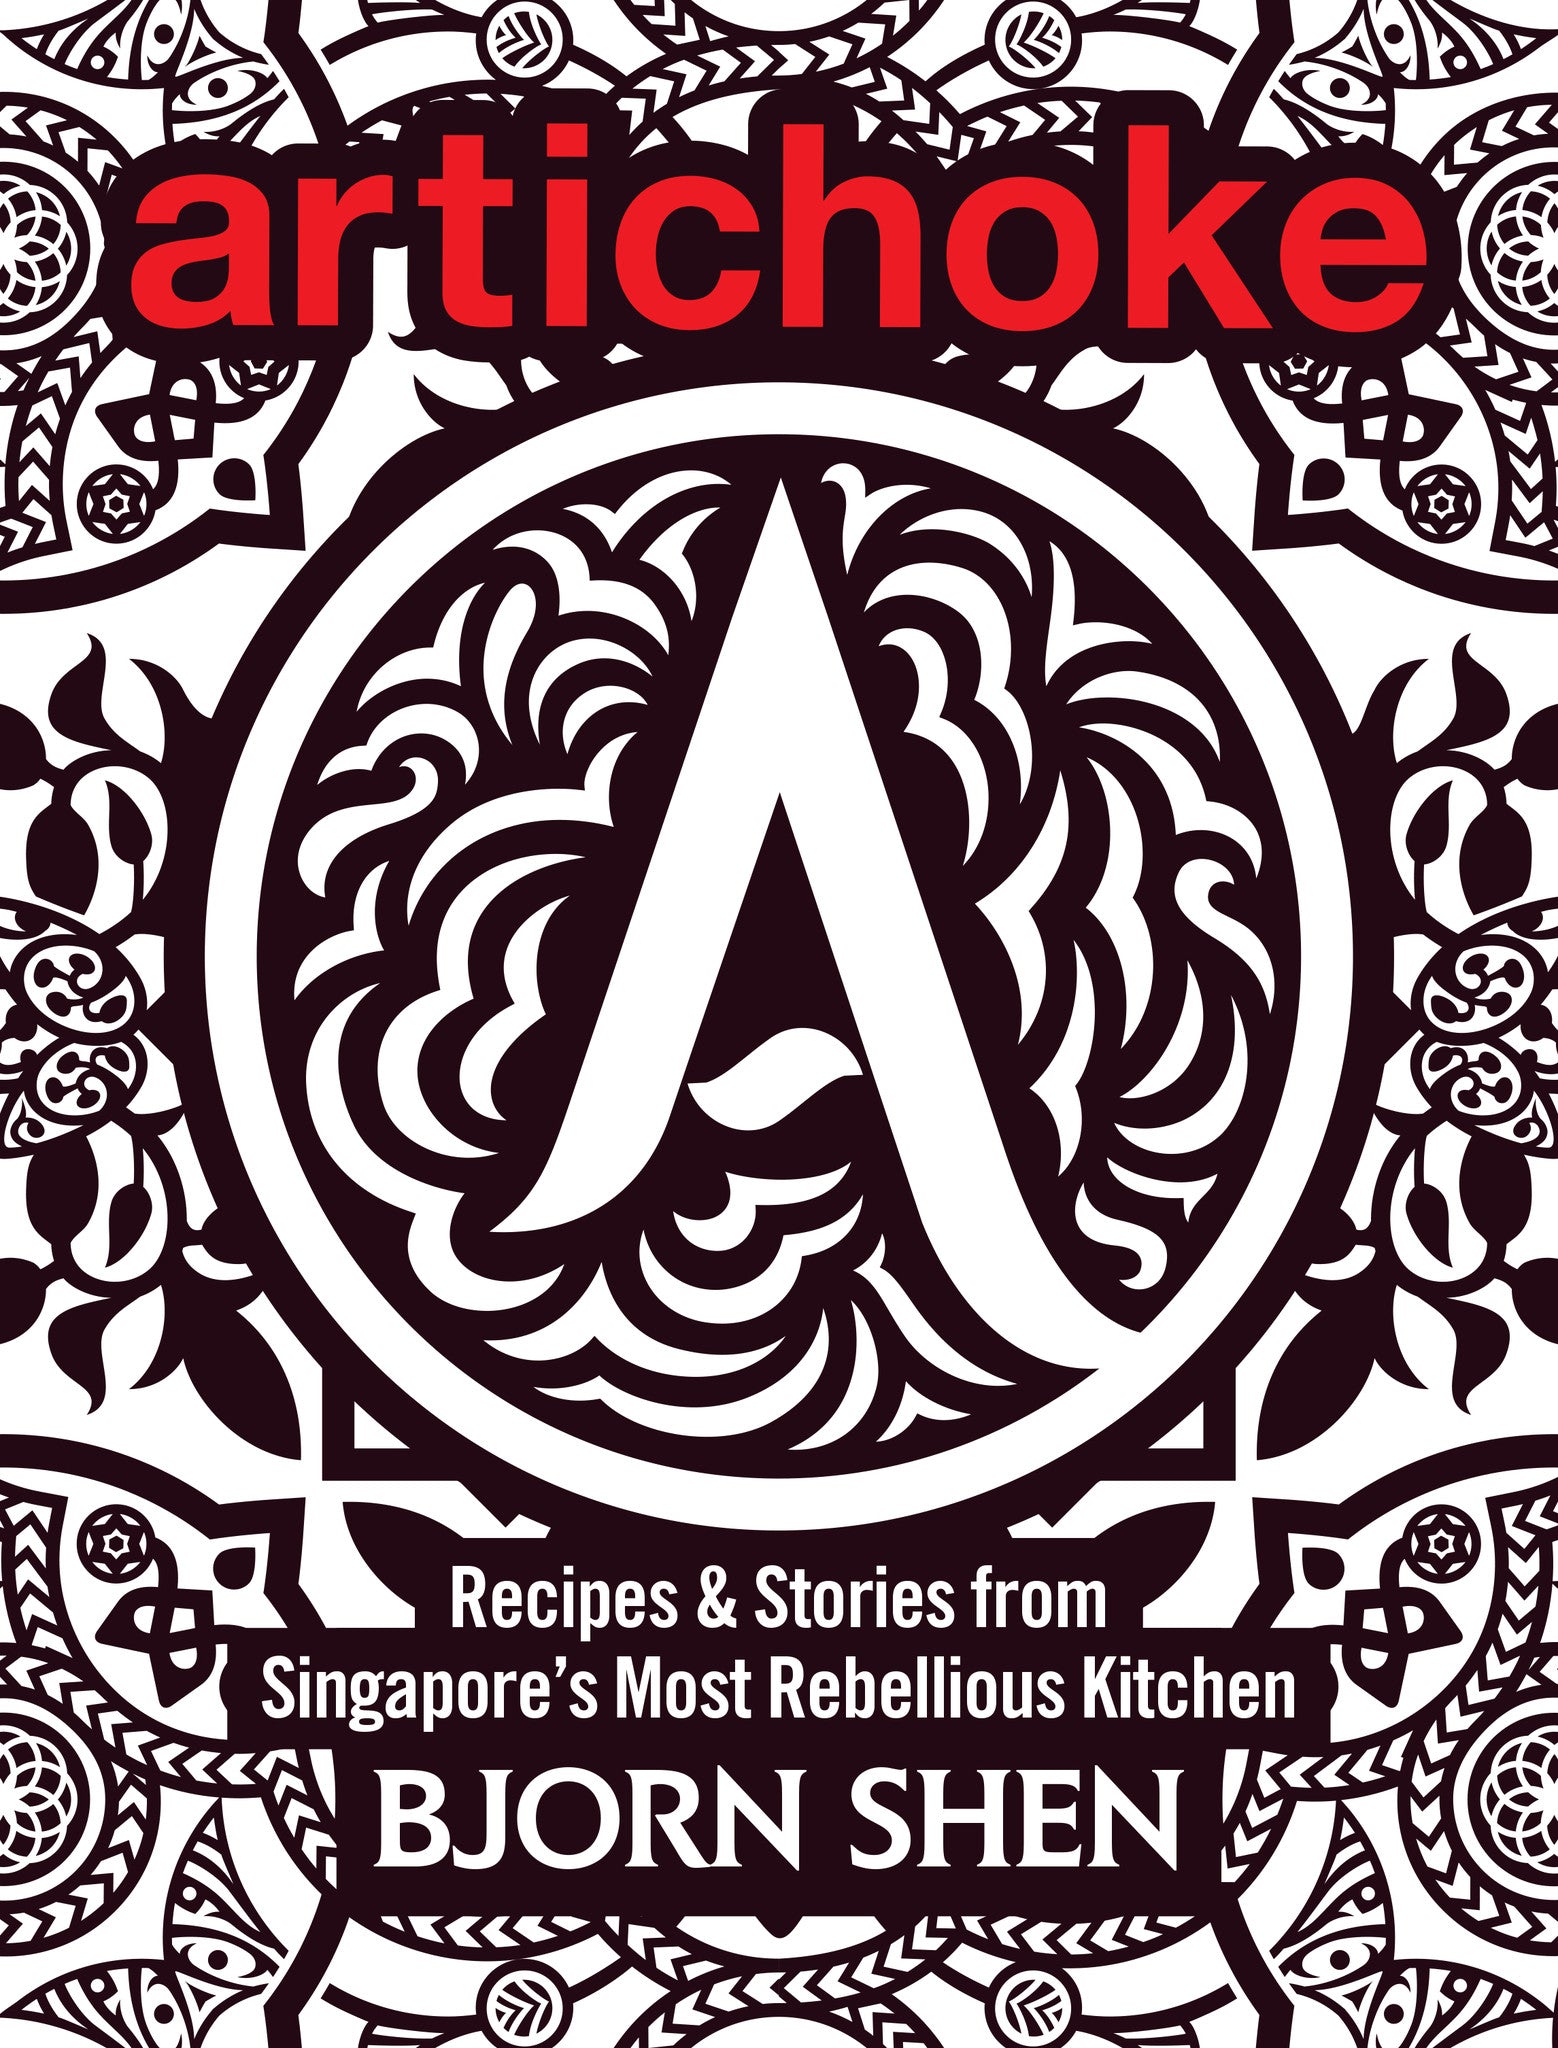 Artichoke: Recipes & Stories from Singapore's Most Rebellious Kitchen